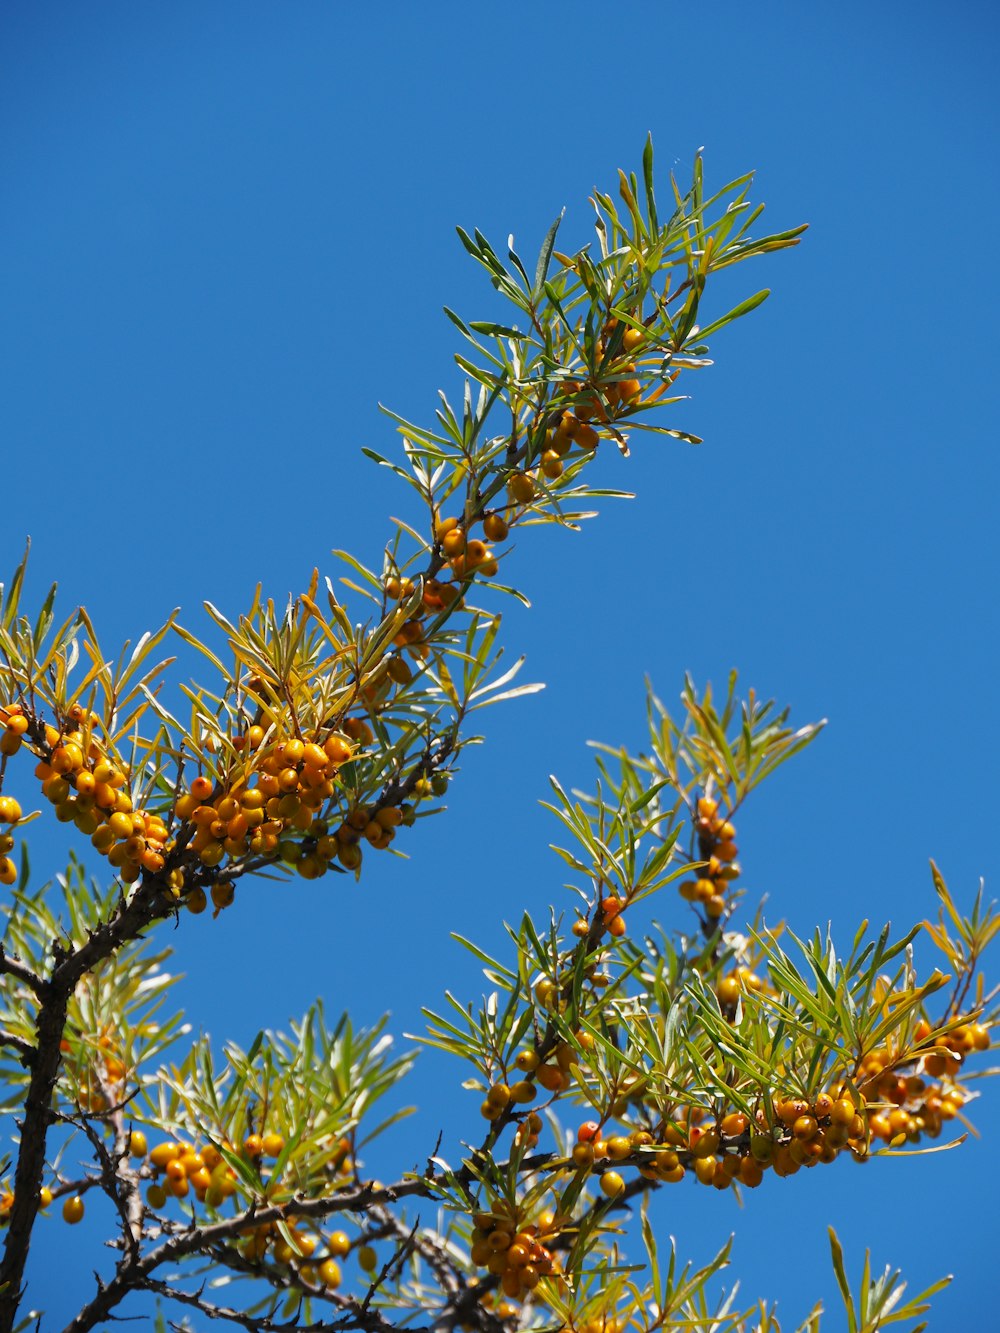 a pine tree with yellow berries on it